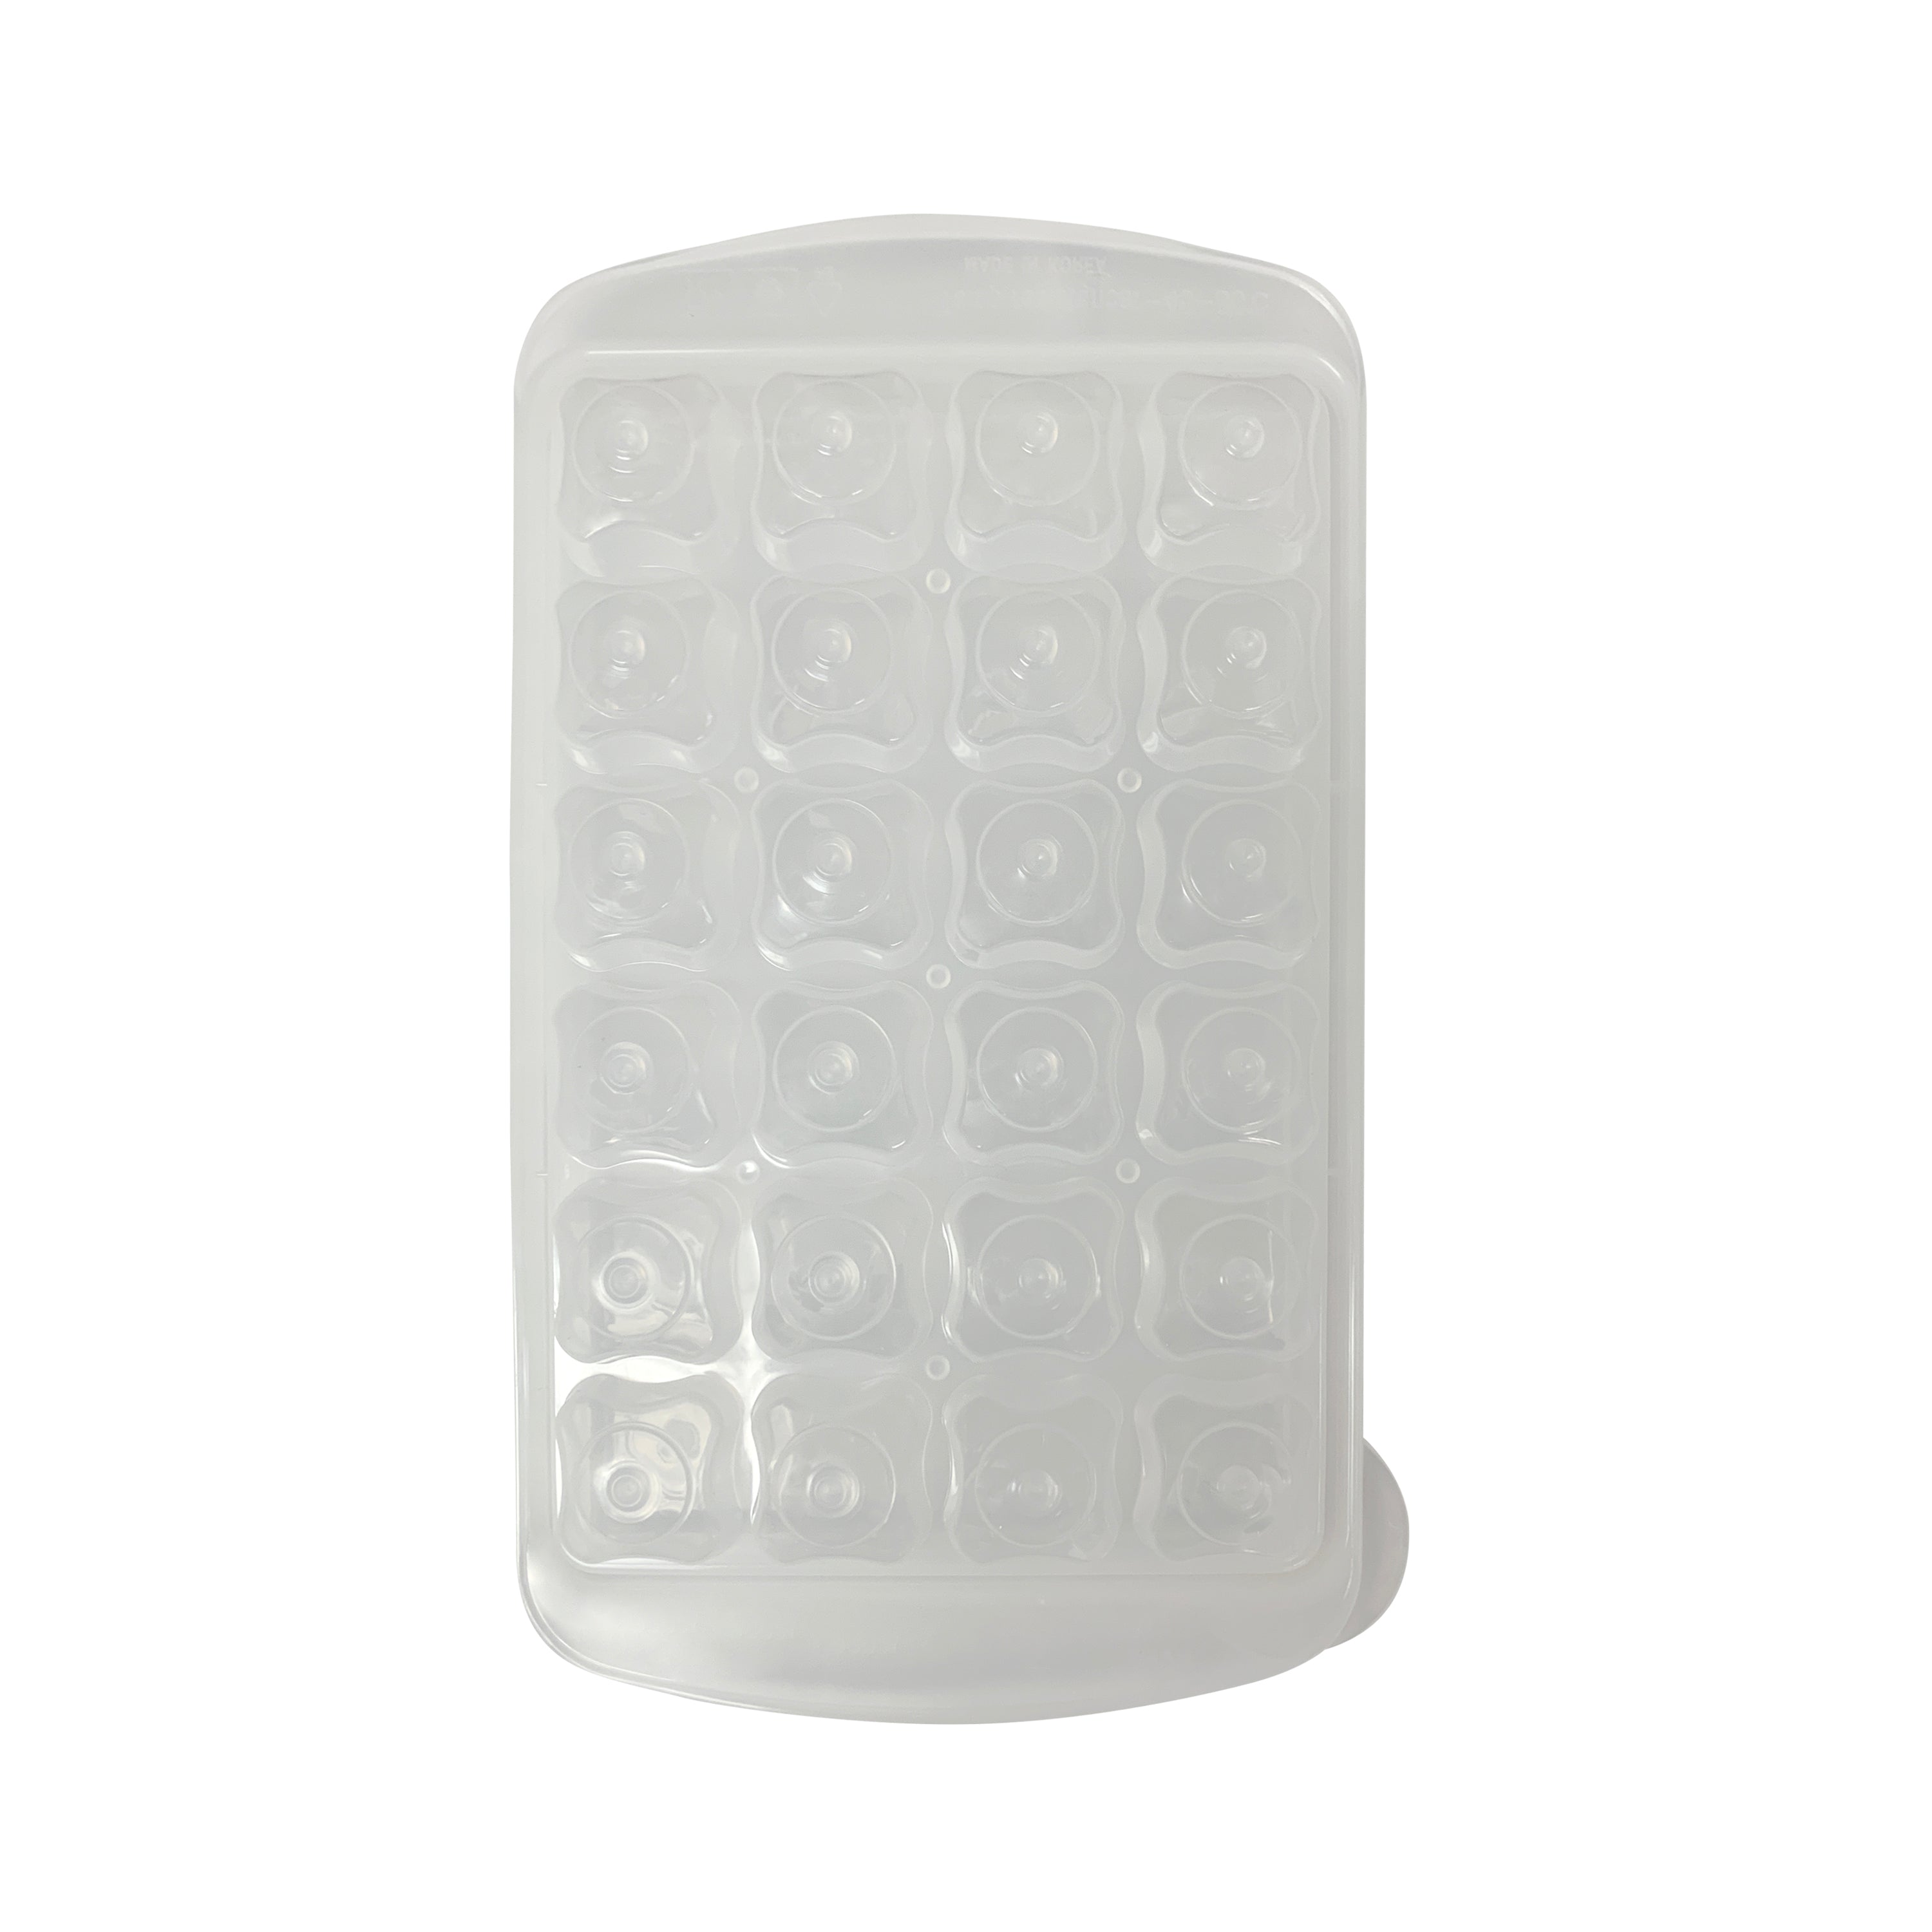 Compare Color Easily Pops Out 15,24 Compartments Ice Cube Tray